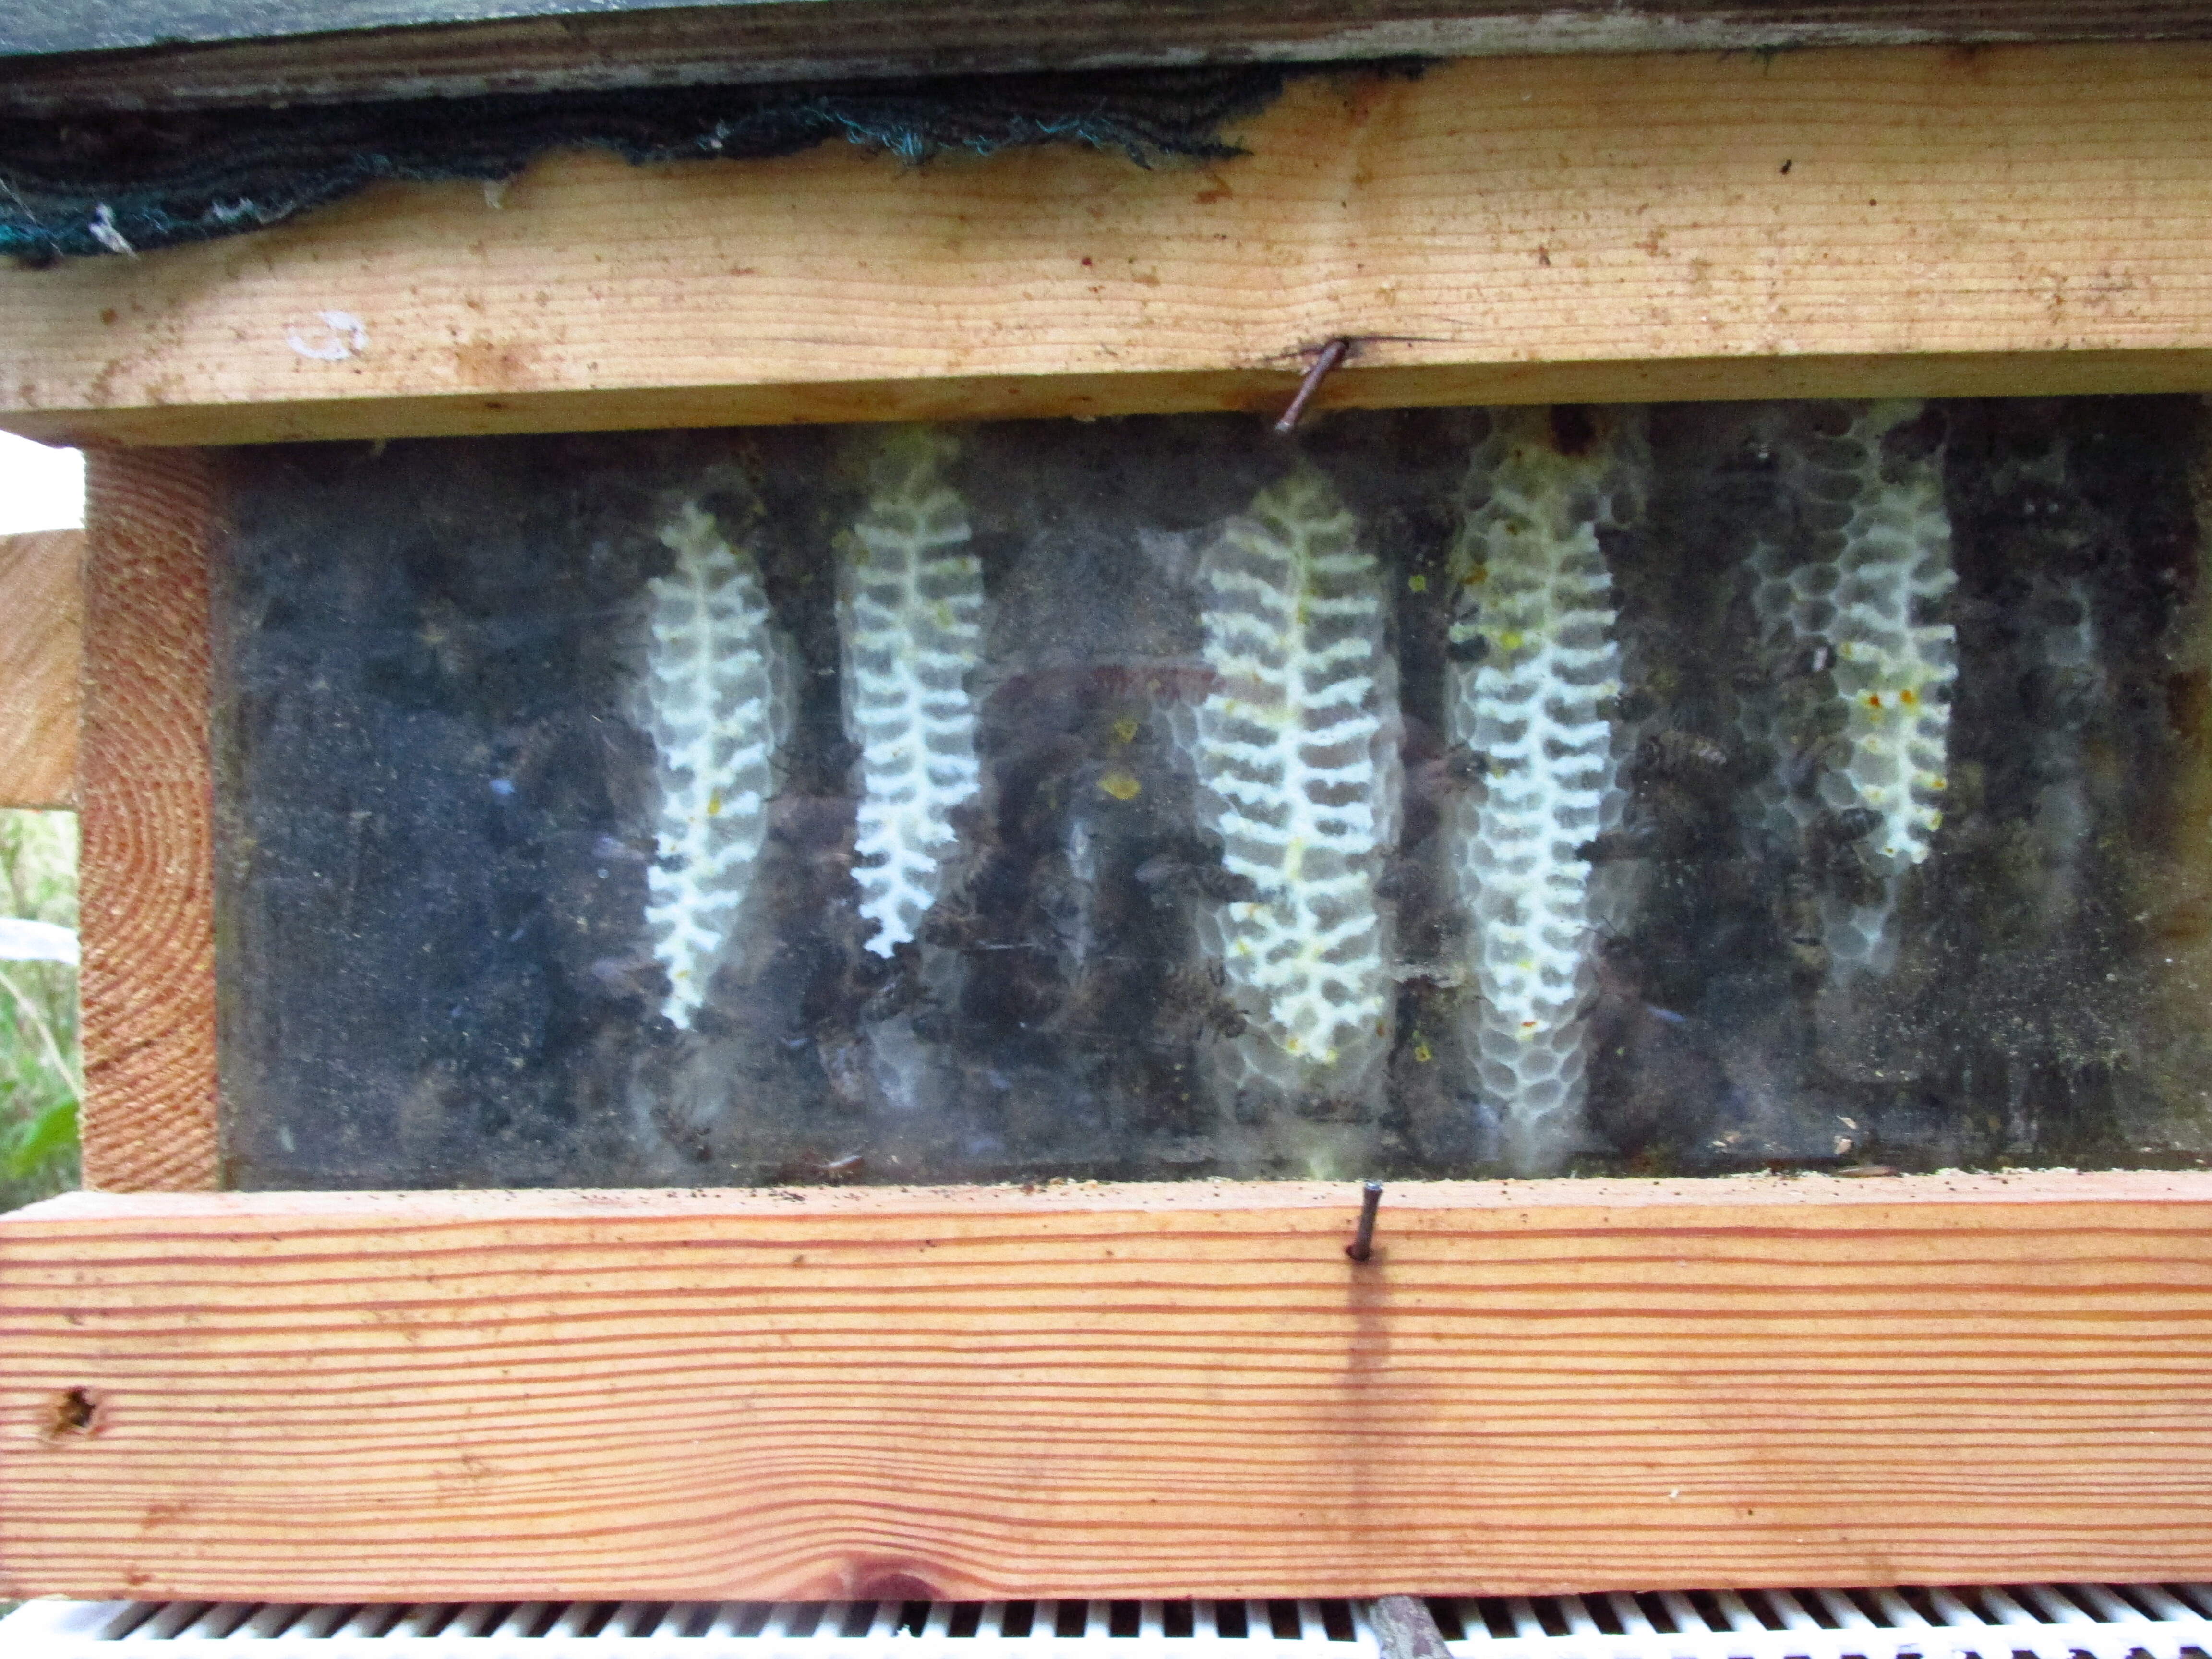 Bees will draw their own combs which is certainly better than untraceable wax foundations